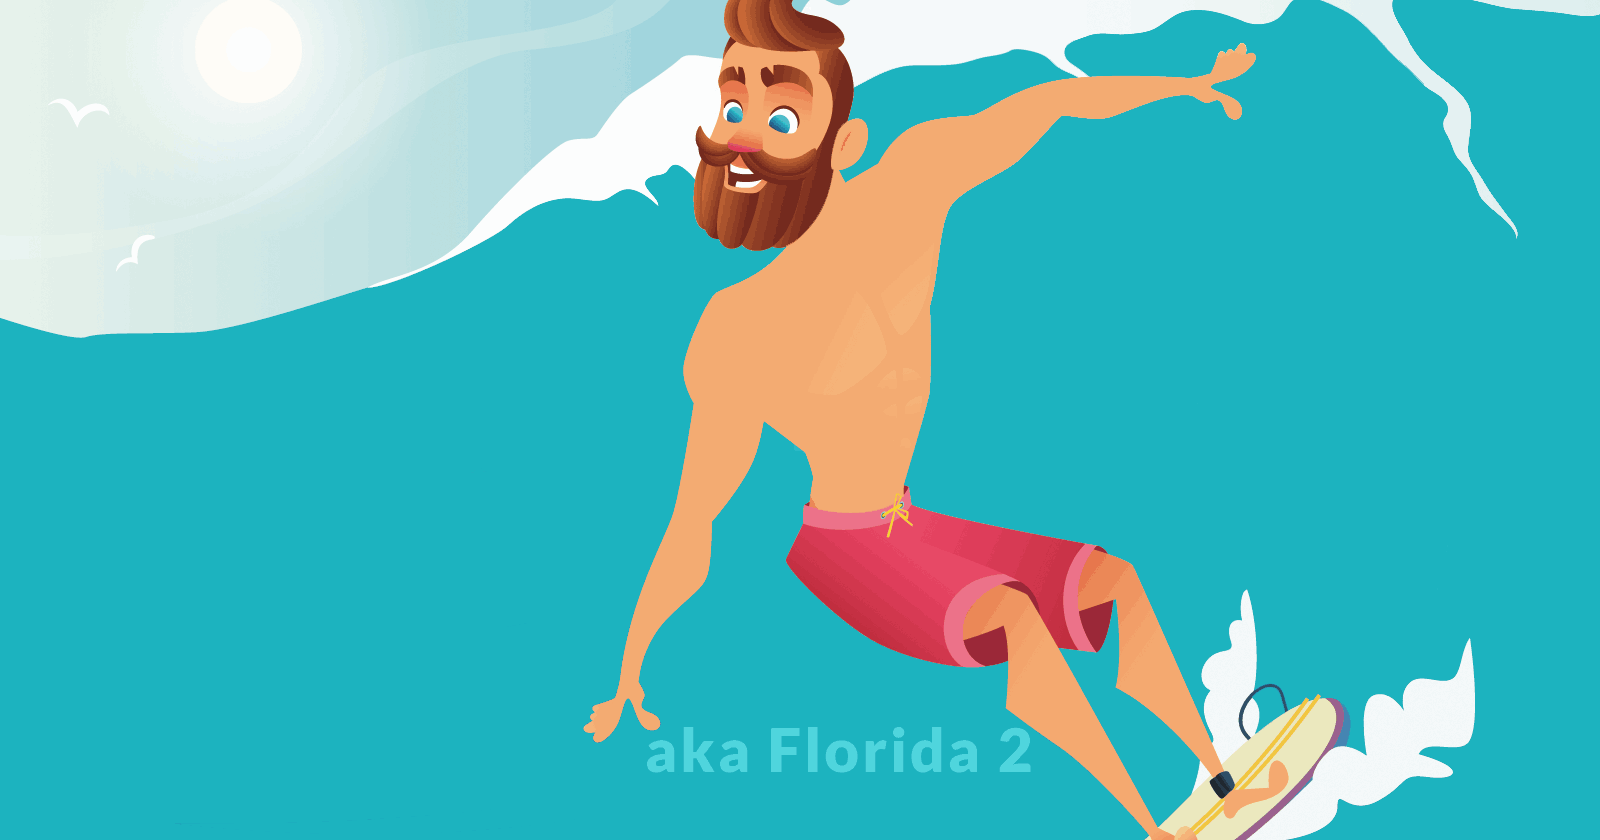 image of a man surfing, with the words aka Florida 2, a reference to the original name given to this update by Brett Tabke